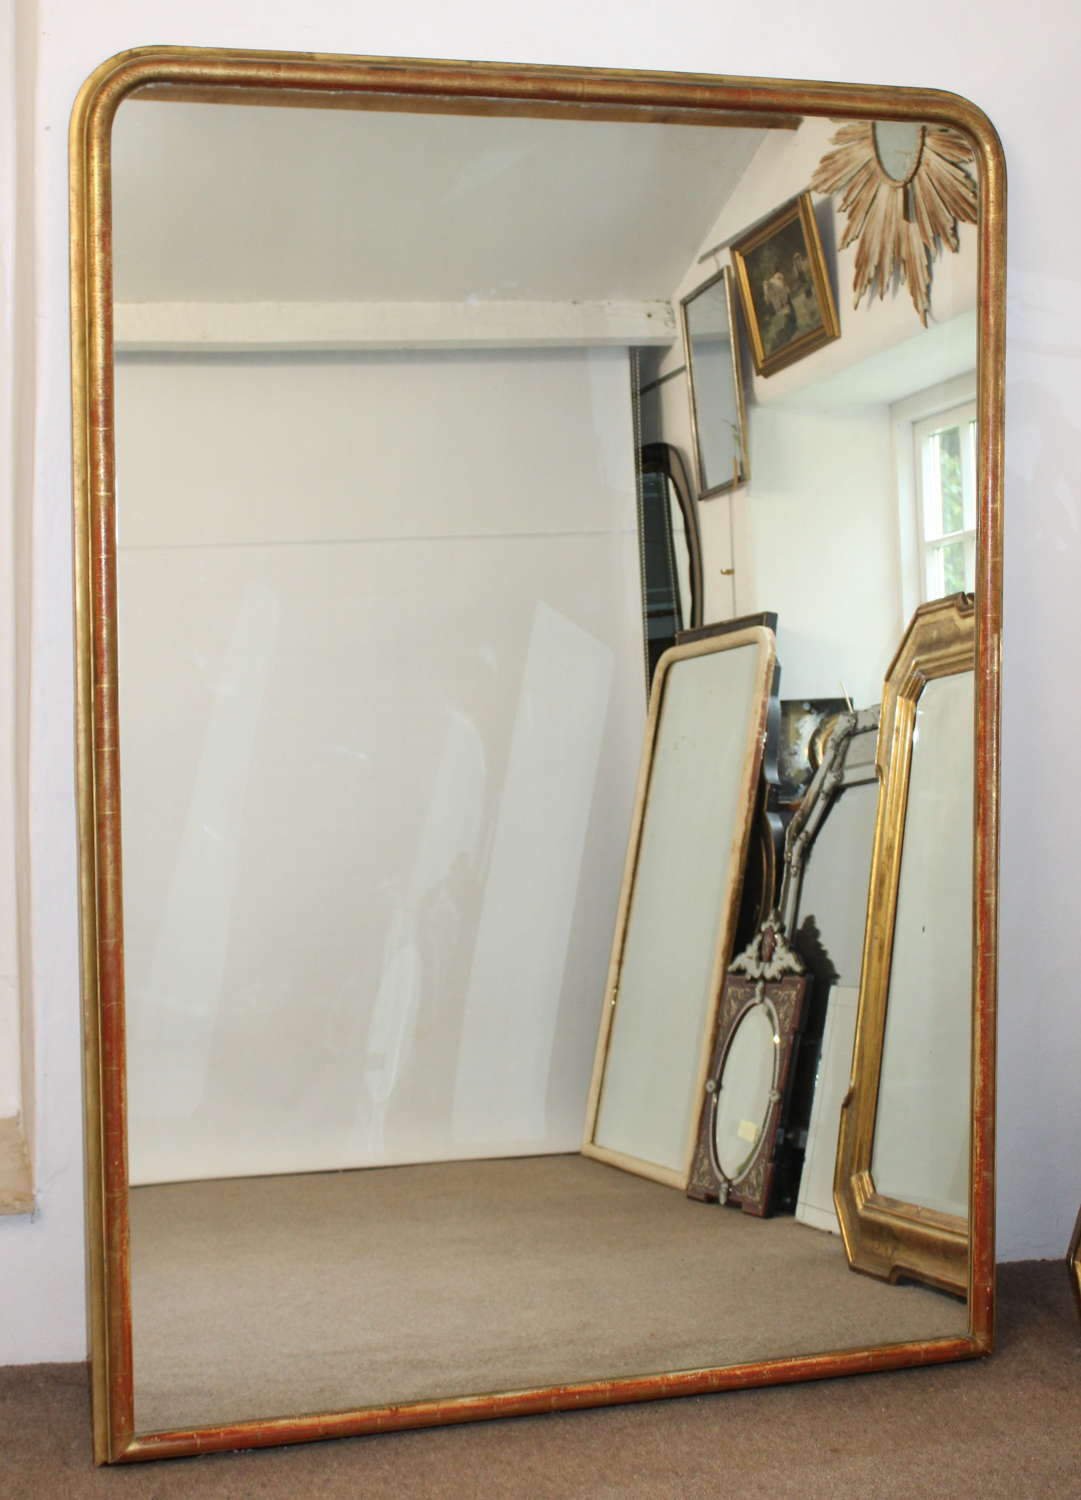 Very large narrow-framed antique French archtop mirror